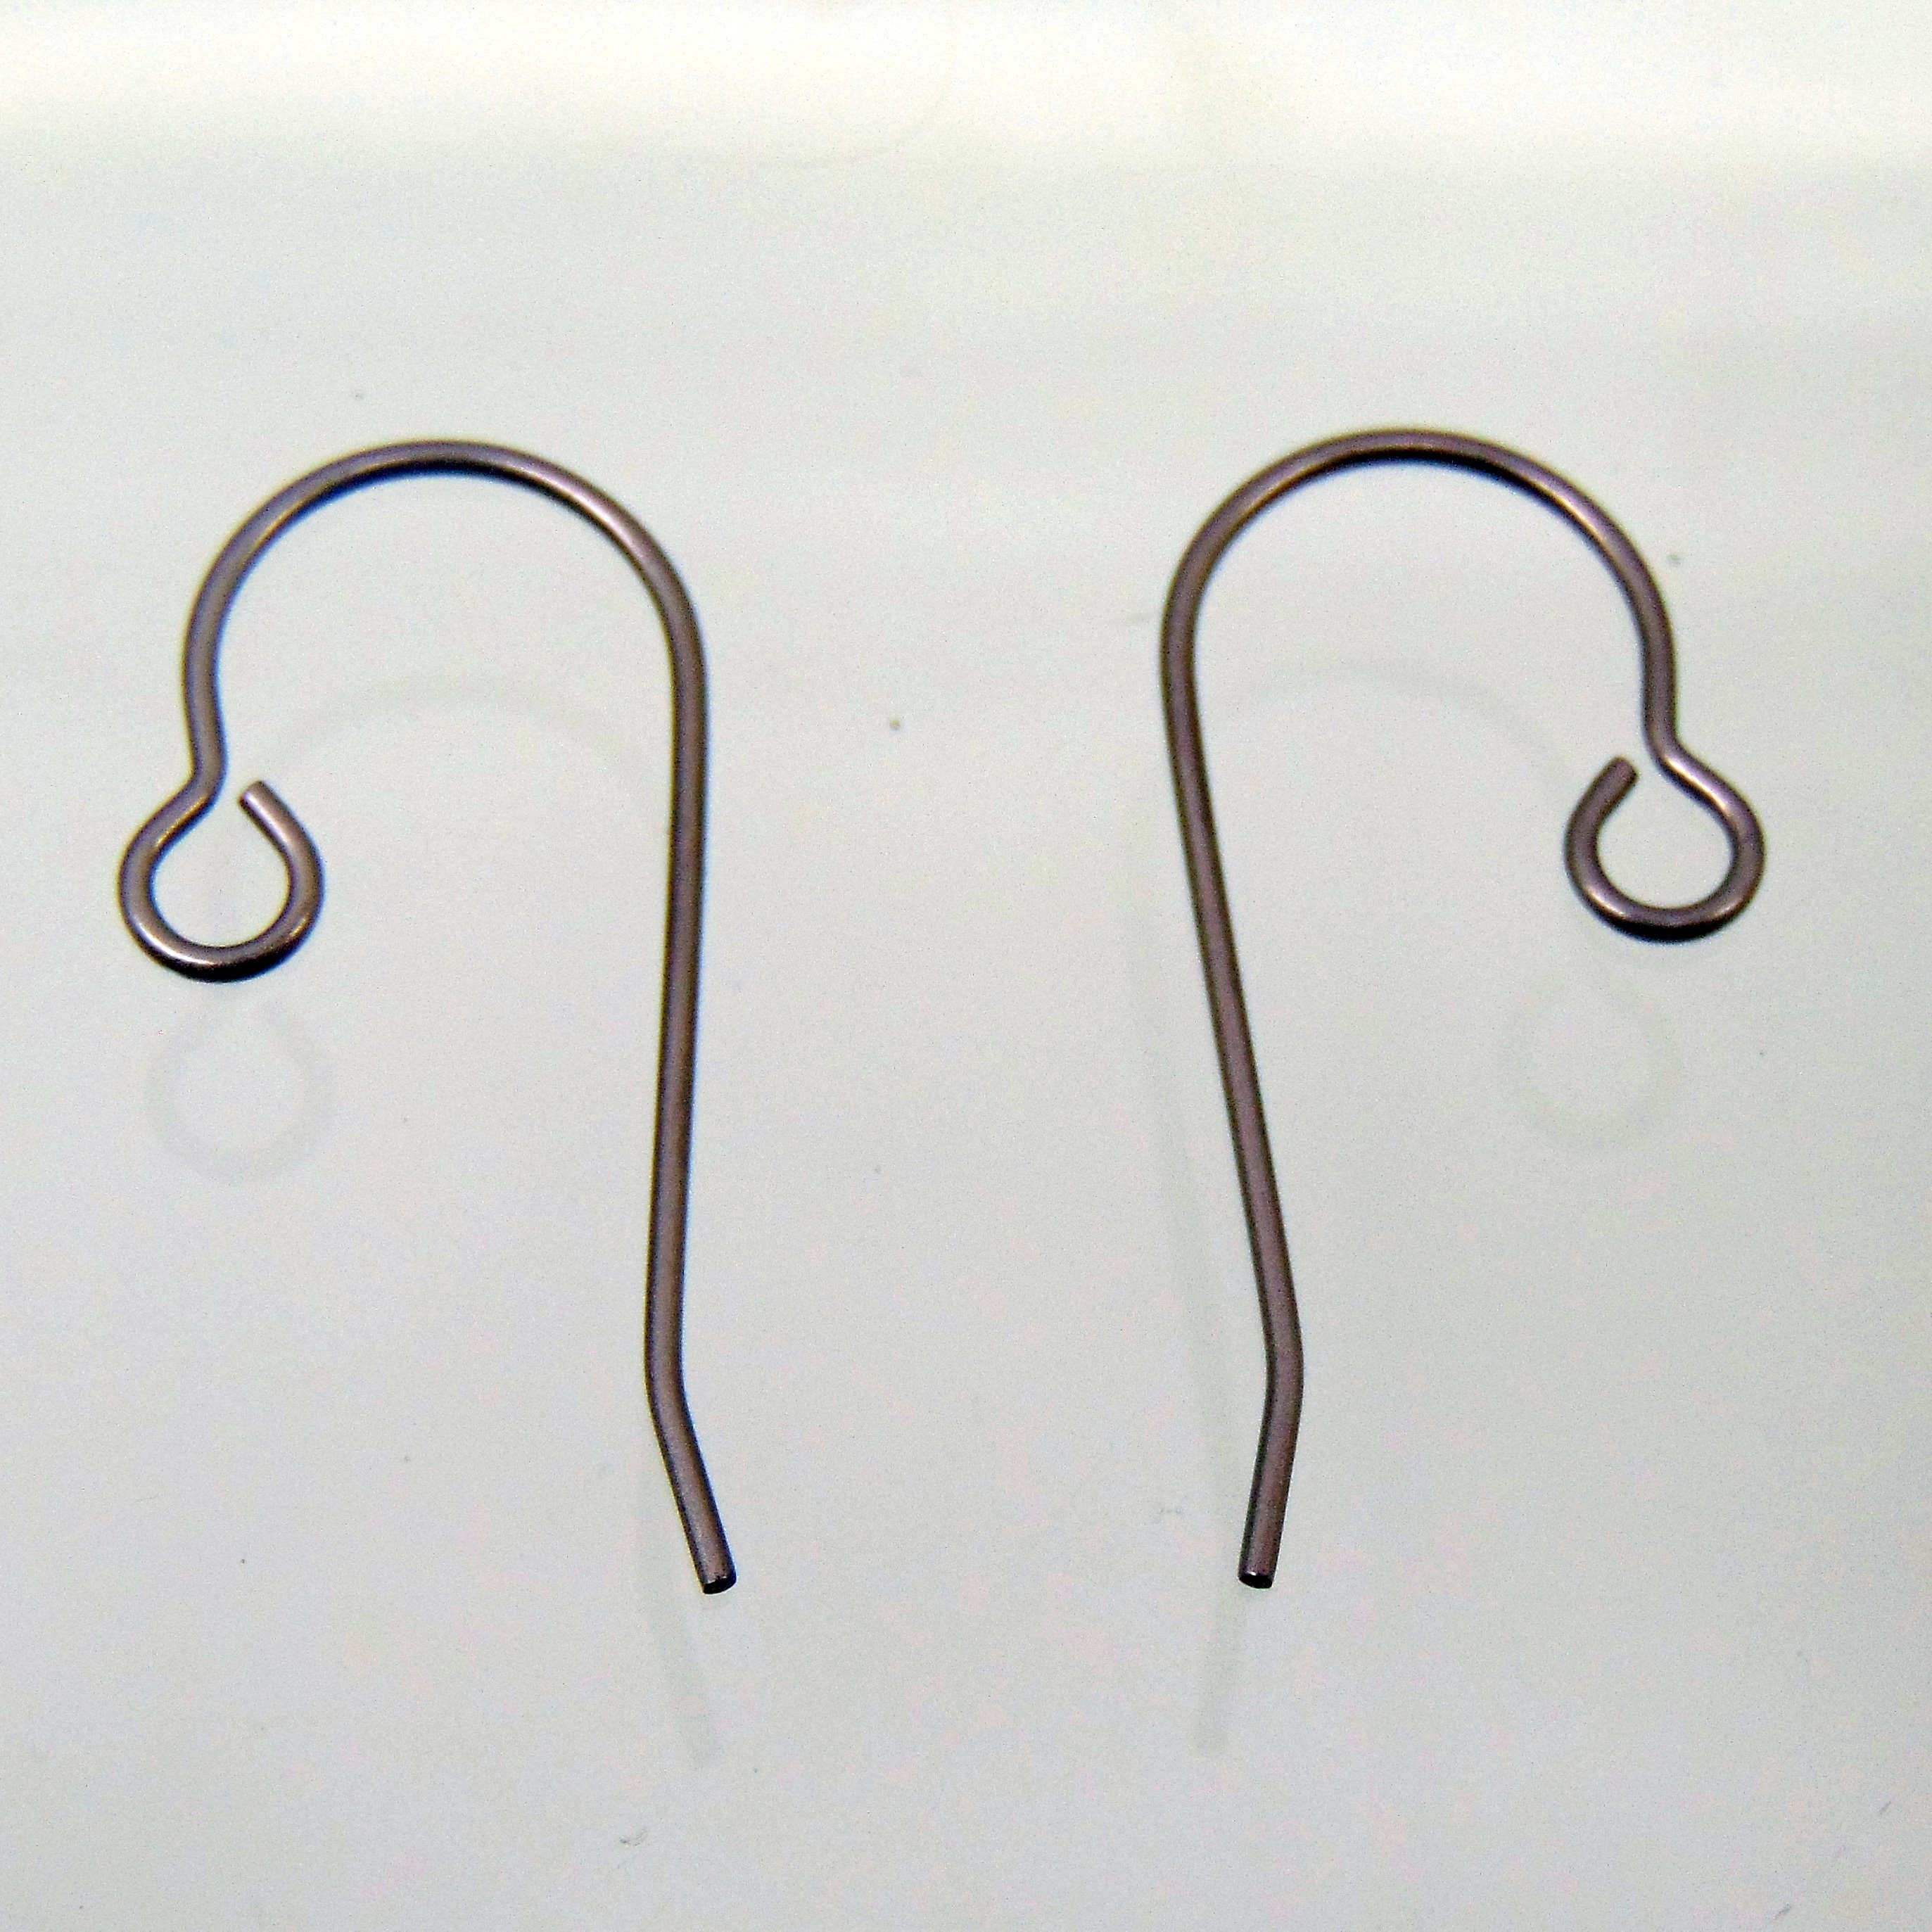 500 Stainless Steel Earring Hooks for Jewelry Making Wholesale Gold Silver  Surgical Earring Earwires Hypoallergenic Tarnish